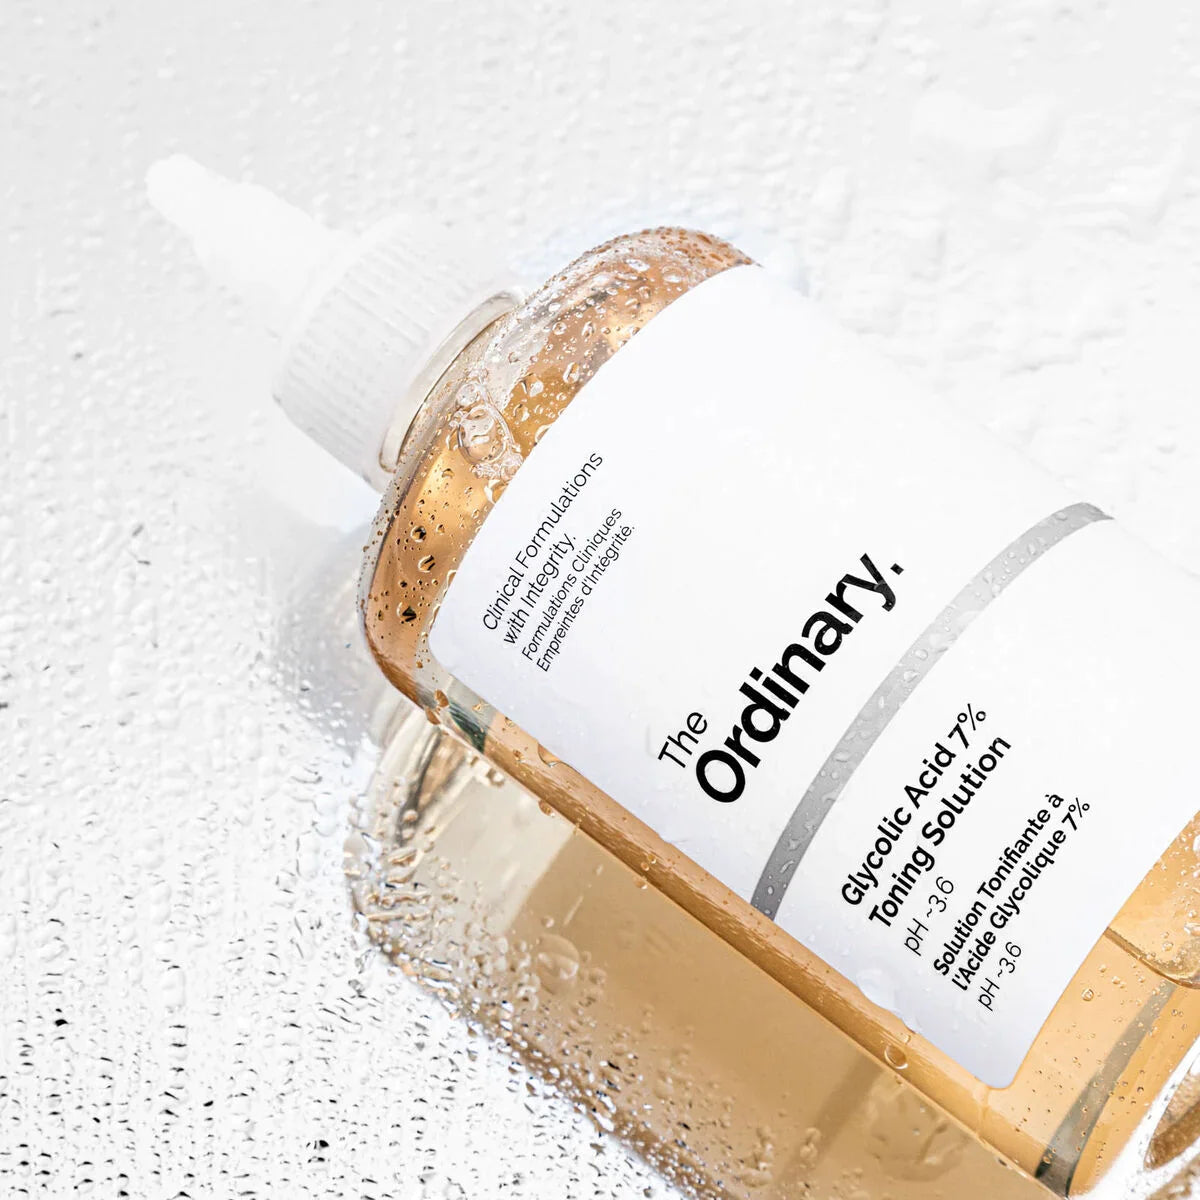 2 Pack) The Ordinary Glycolic Acid 7% Toning Solution 240ml 